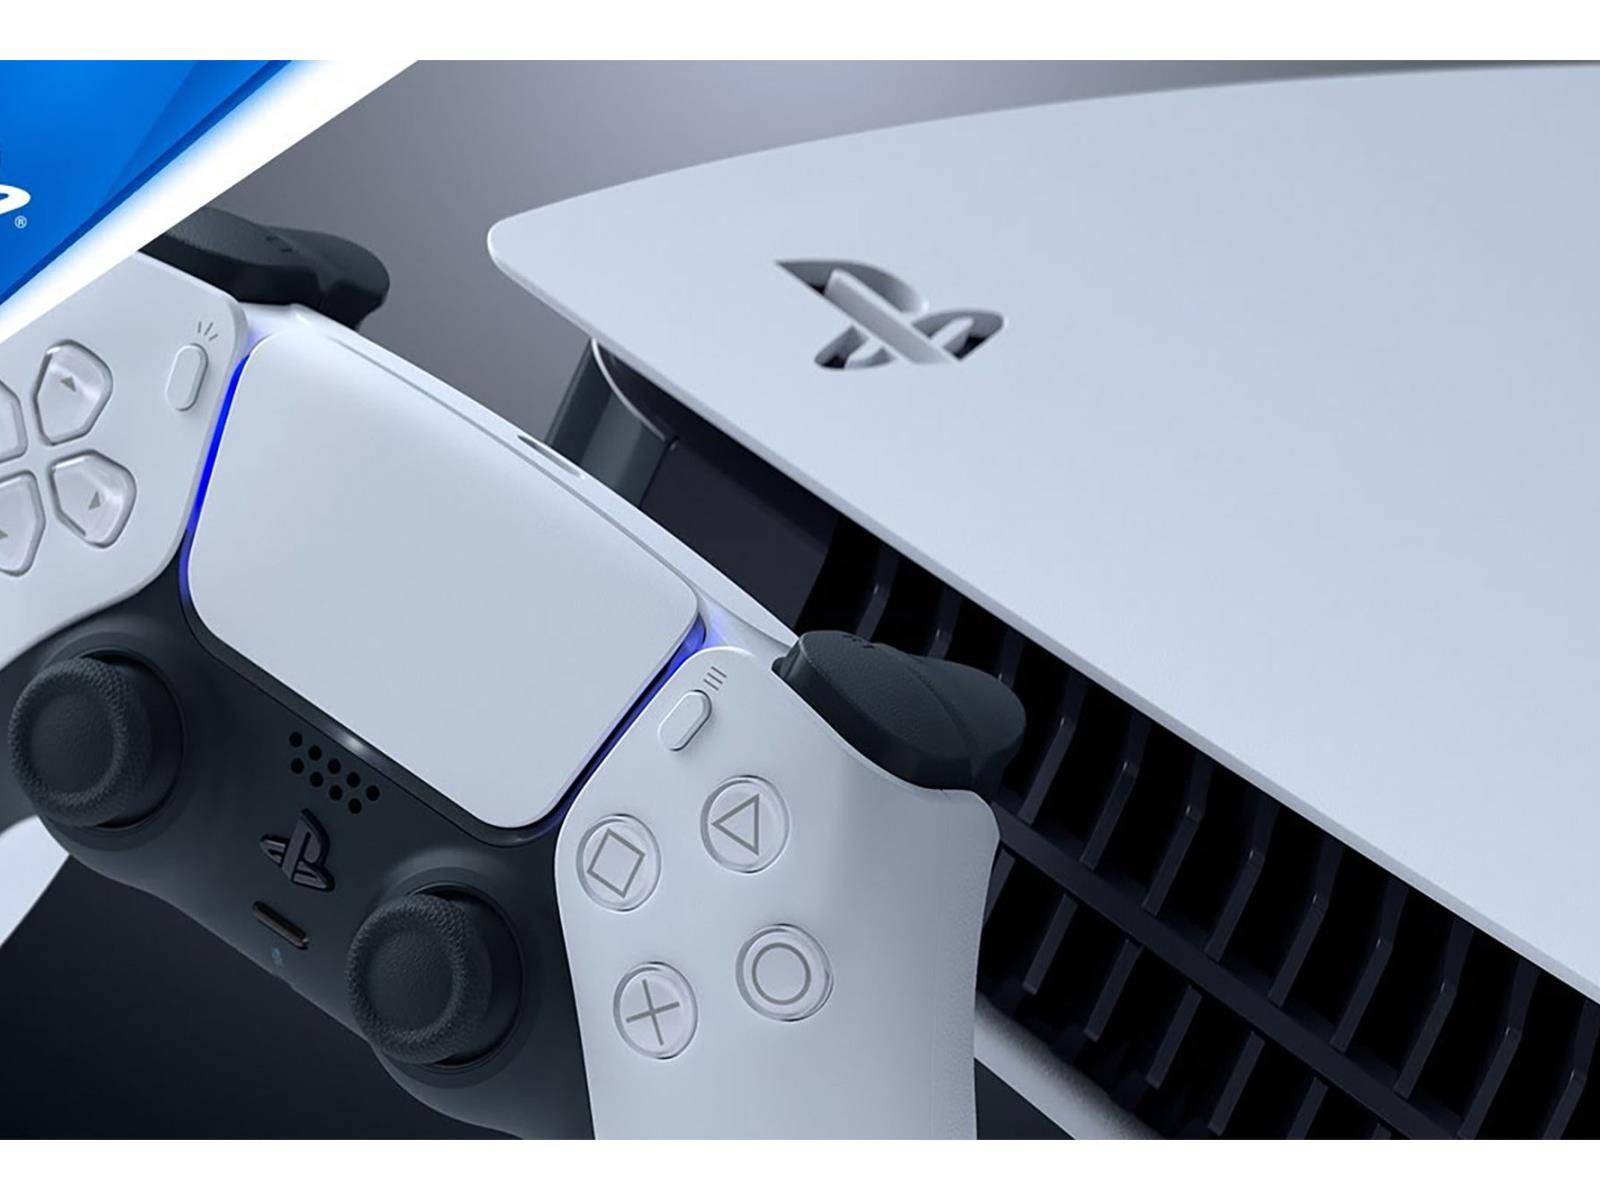 PS5 Stock: Sign-Up for Invite from PlayStation Direct to Purchase